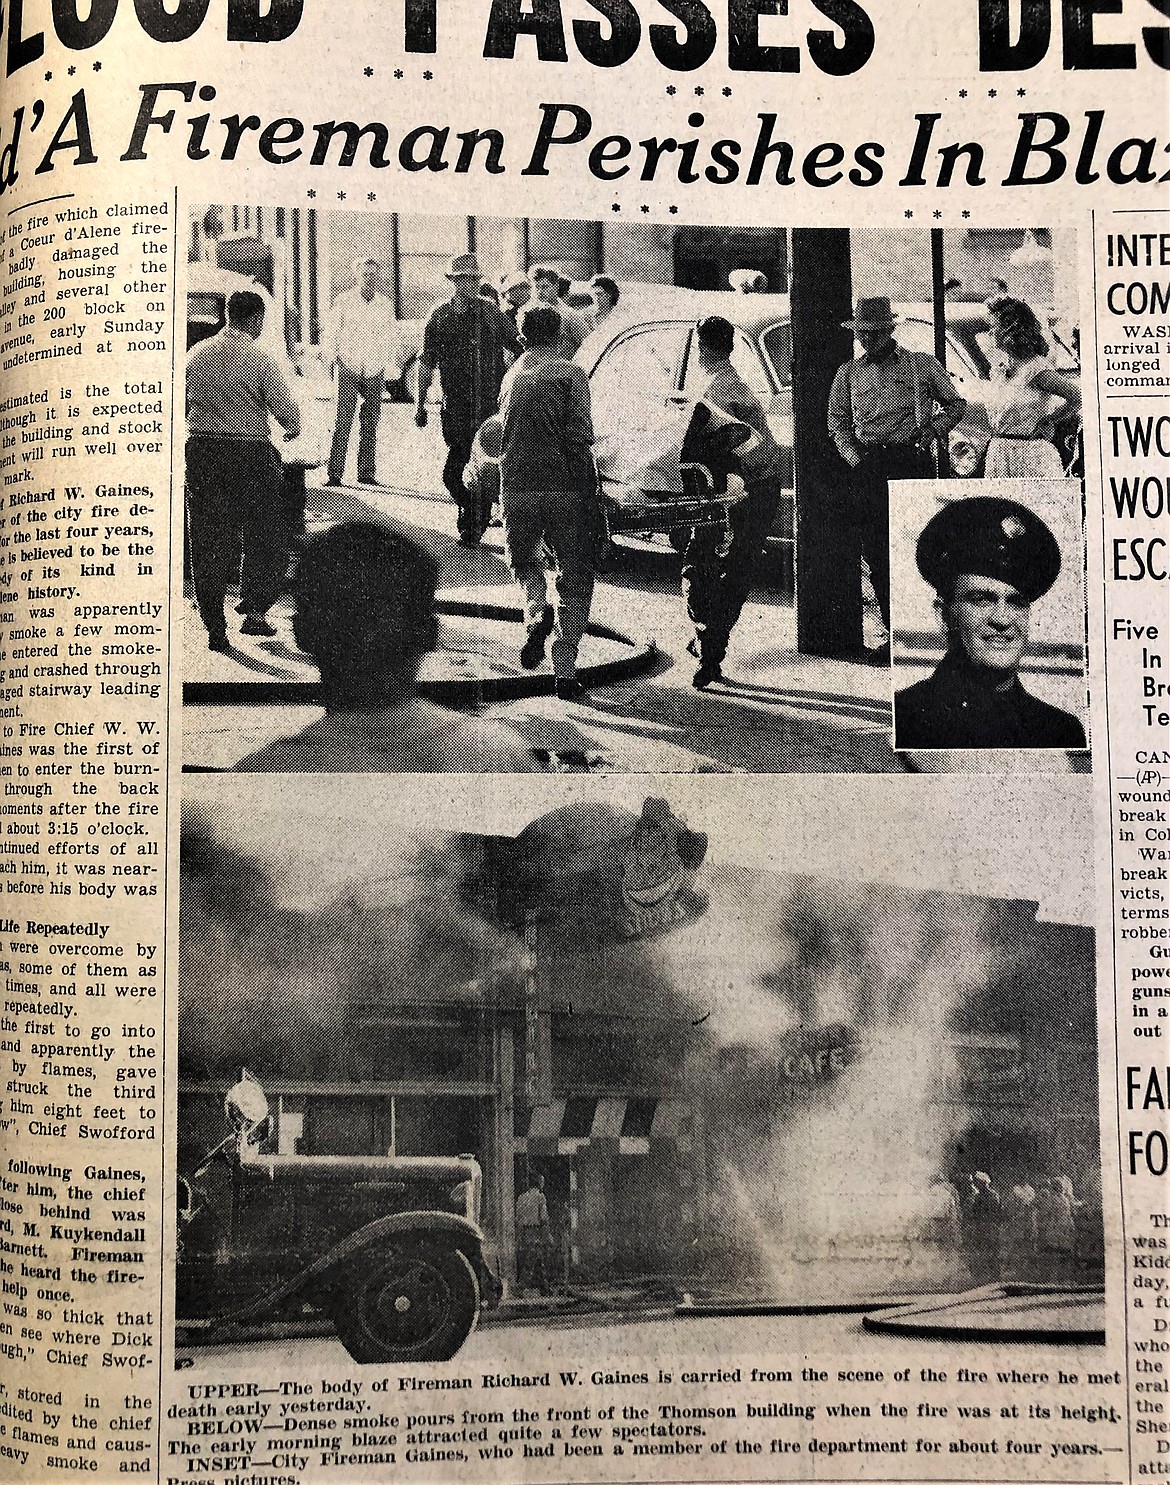 A July 16, 1951, shot of the front page of the Coeur d'Alene Press, reporting the news of firefighter Richard Gaines' death.